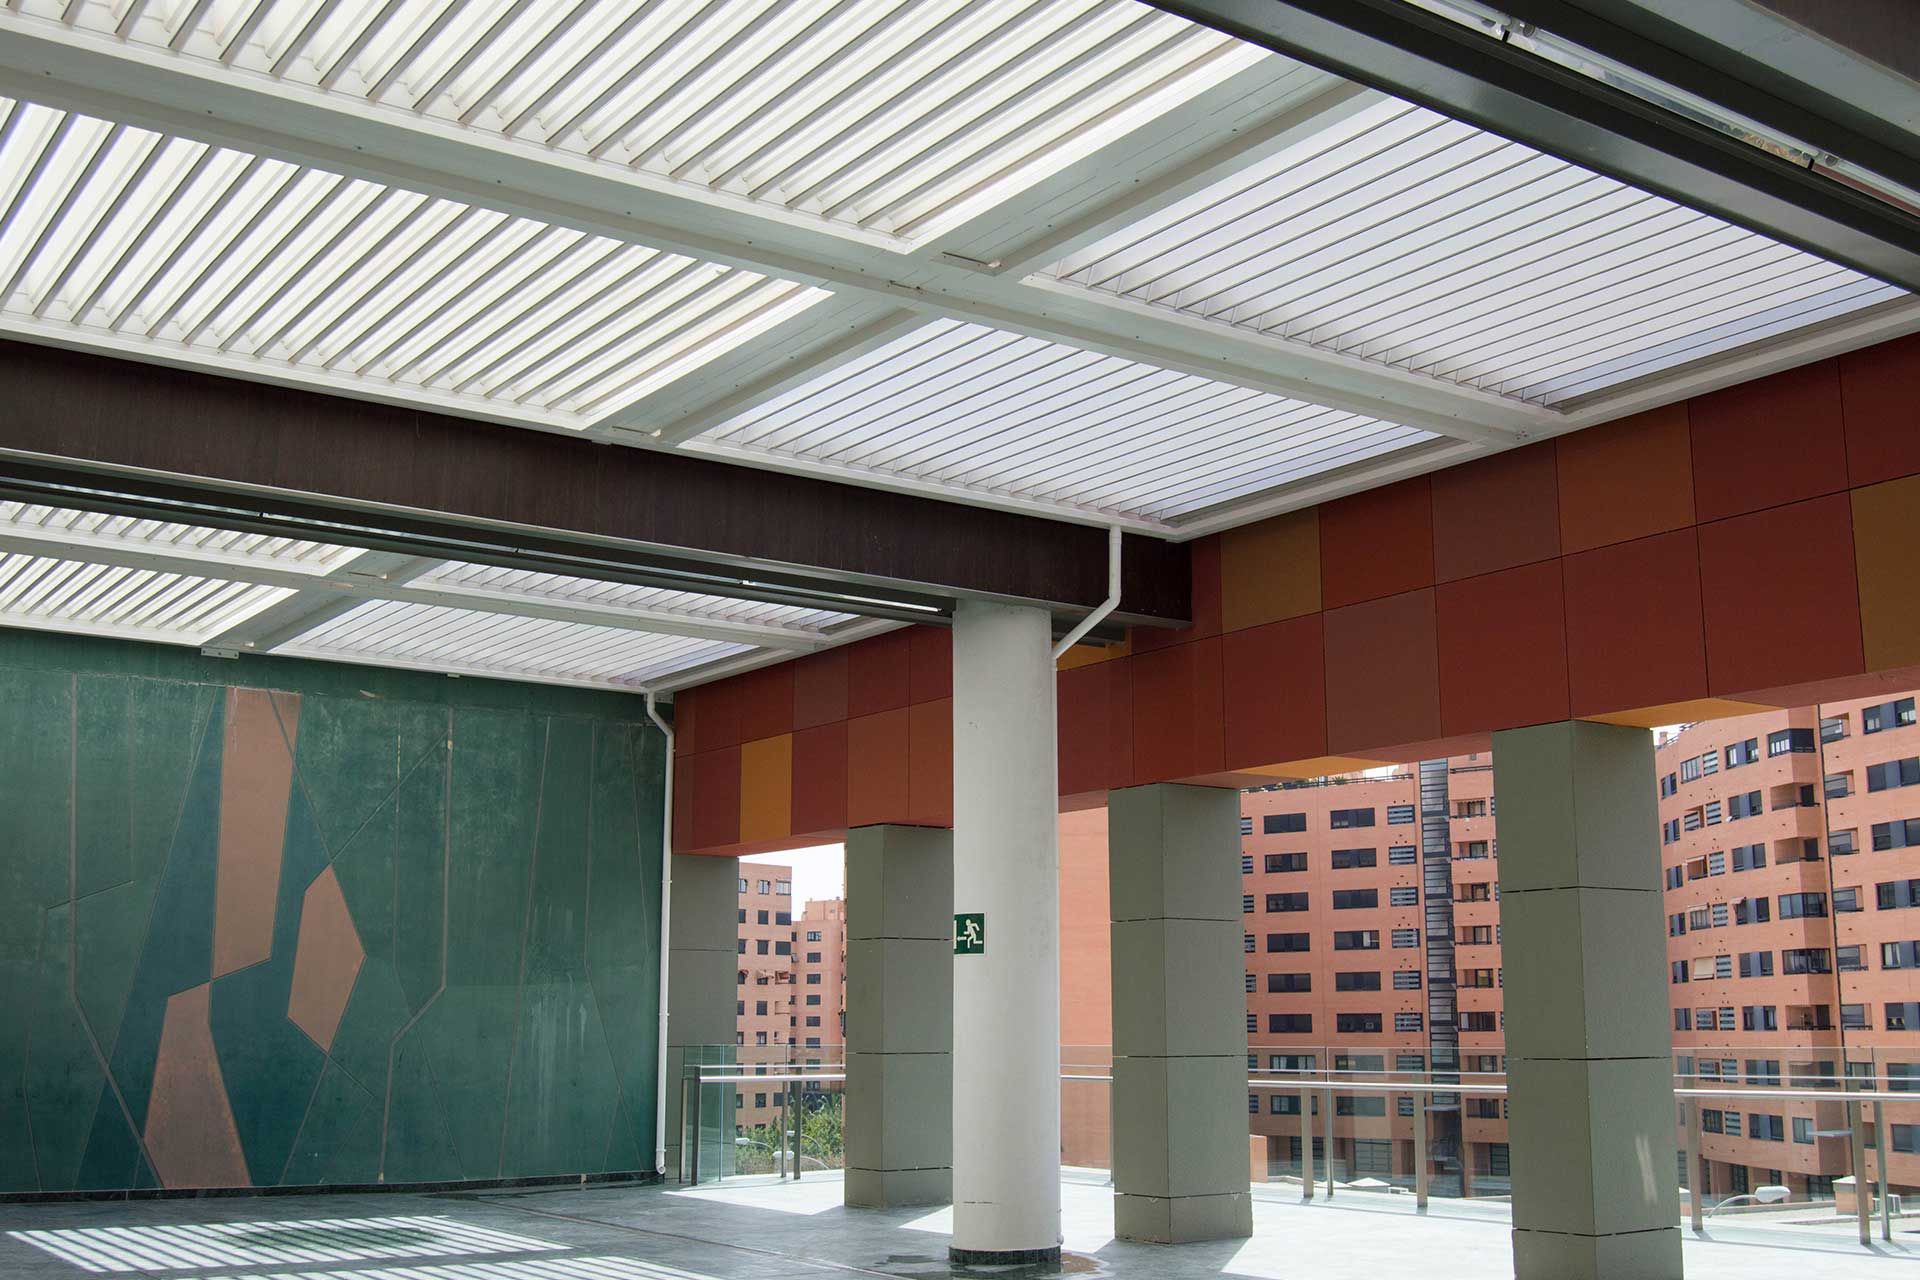 Bioclimatic pergola on the outside of the mall.